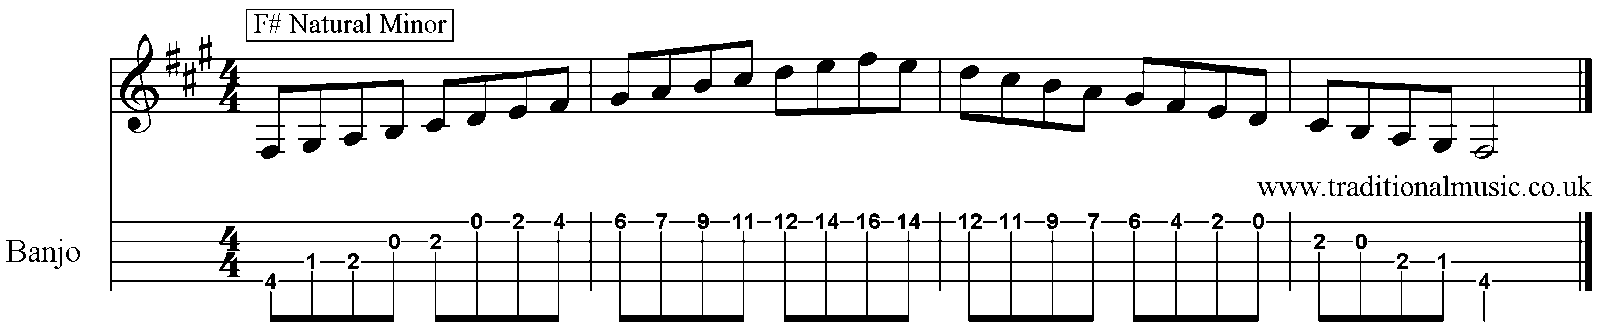 Minor Scales for Banjo A